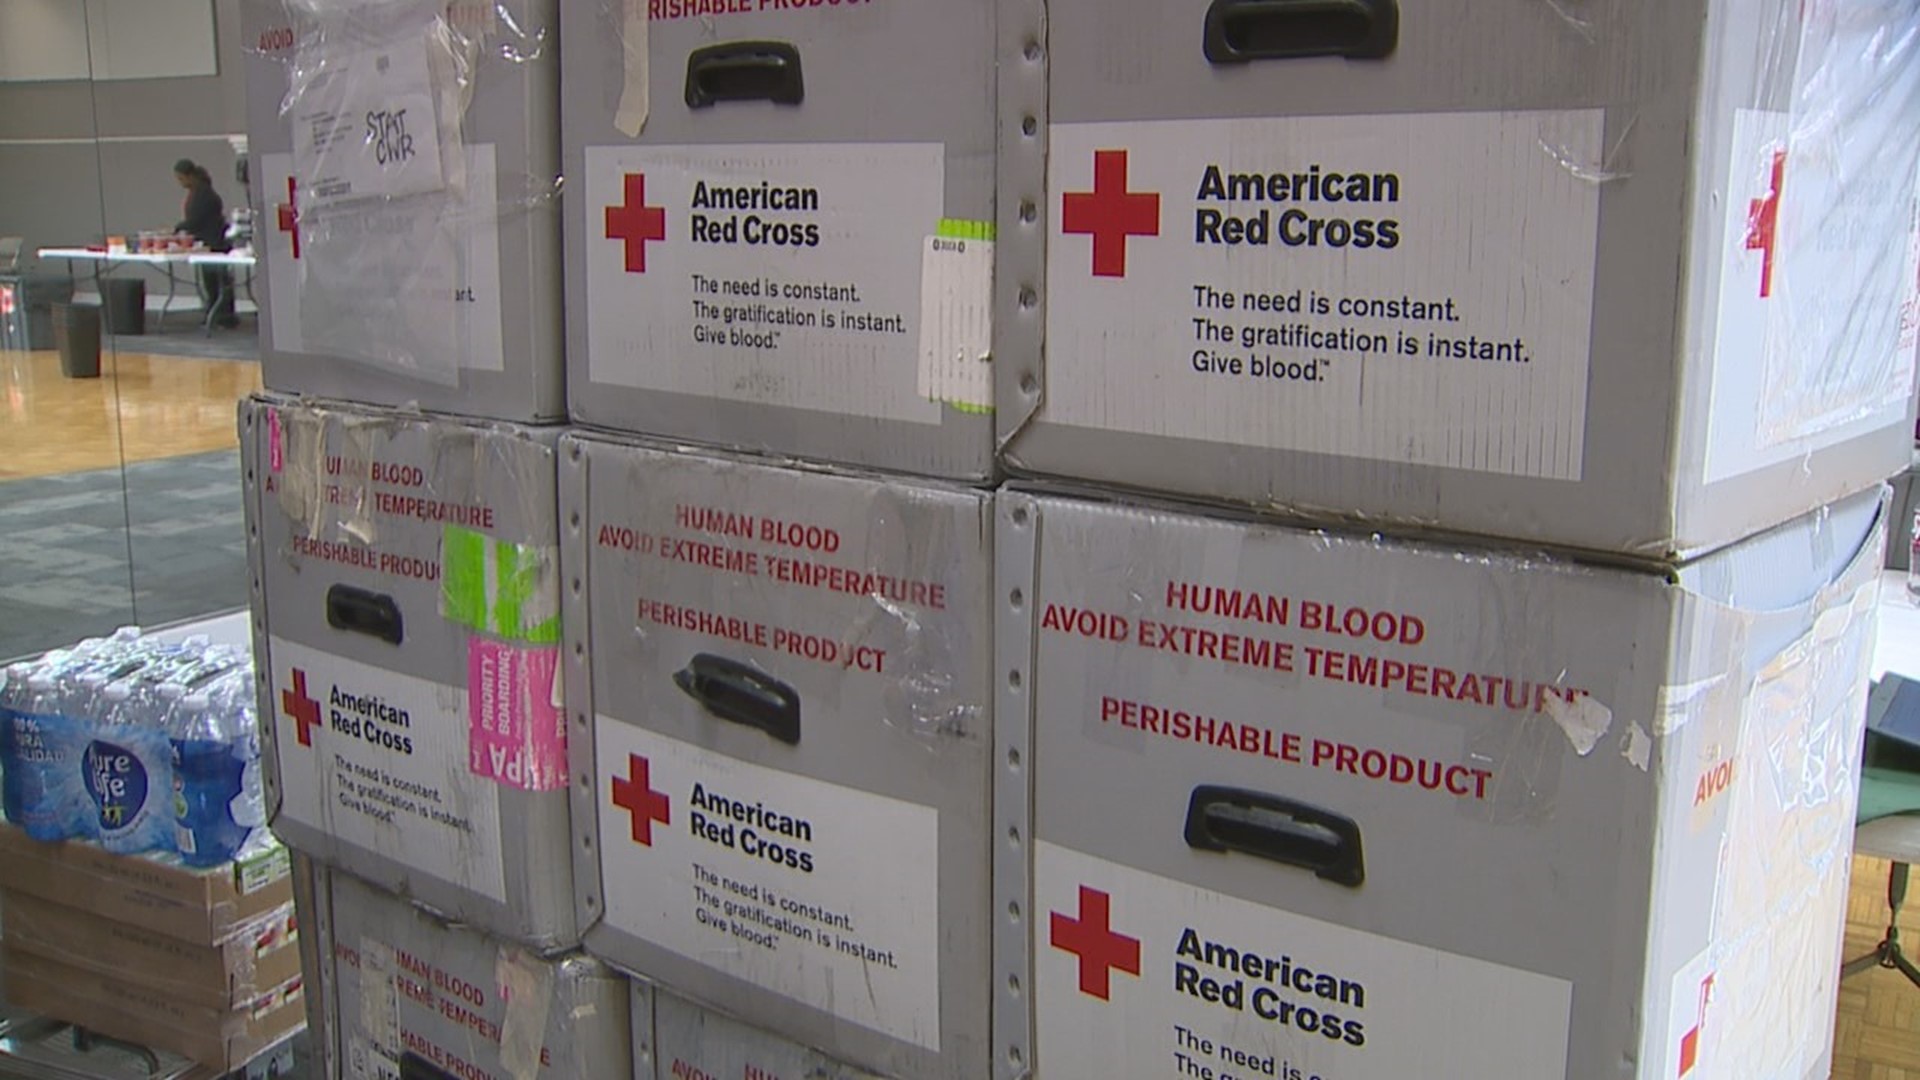 The American Red Cross put out an urgent request for additional donations last month.